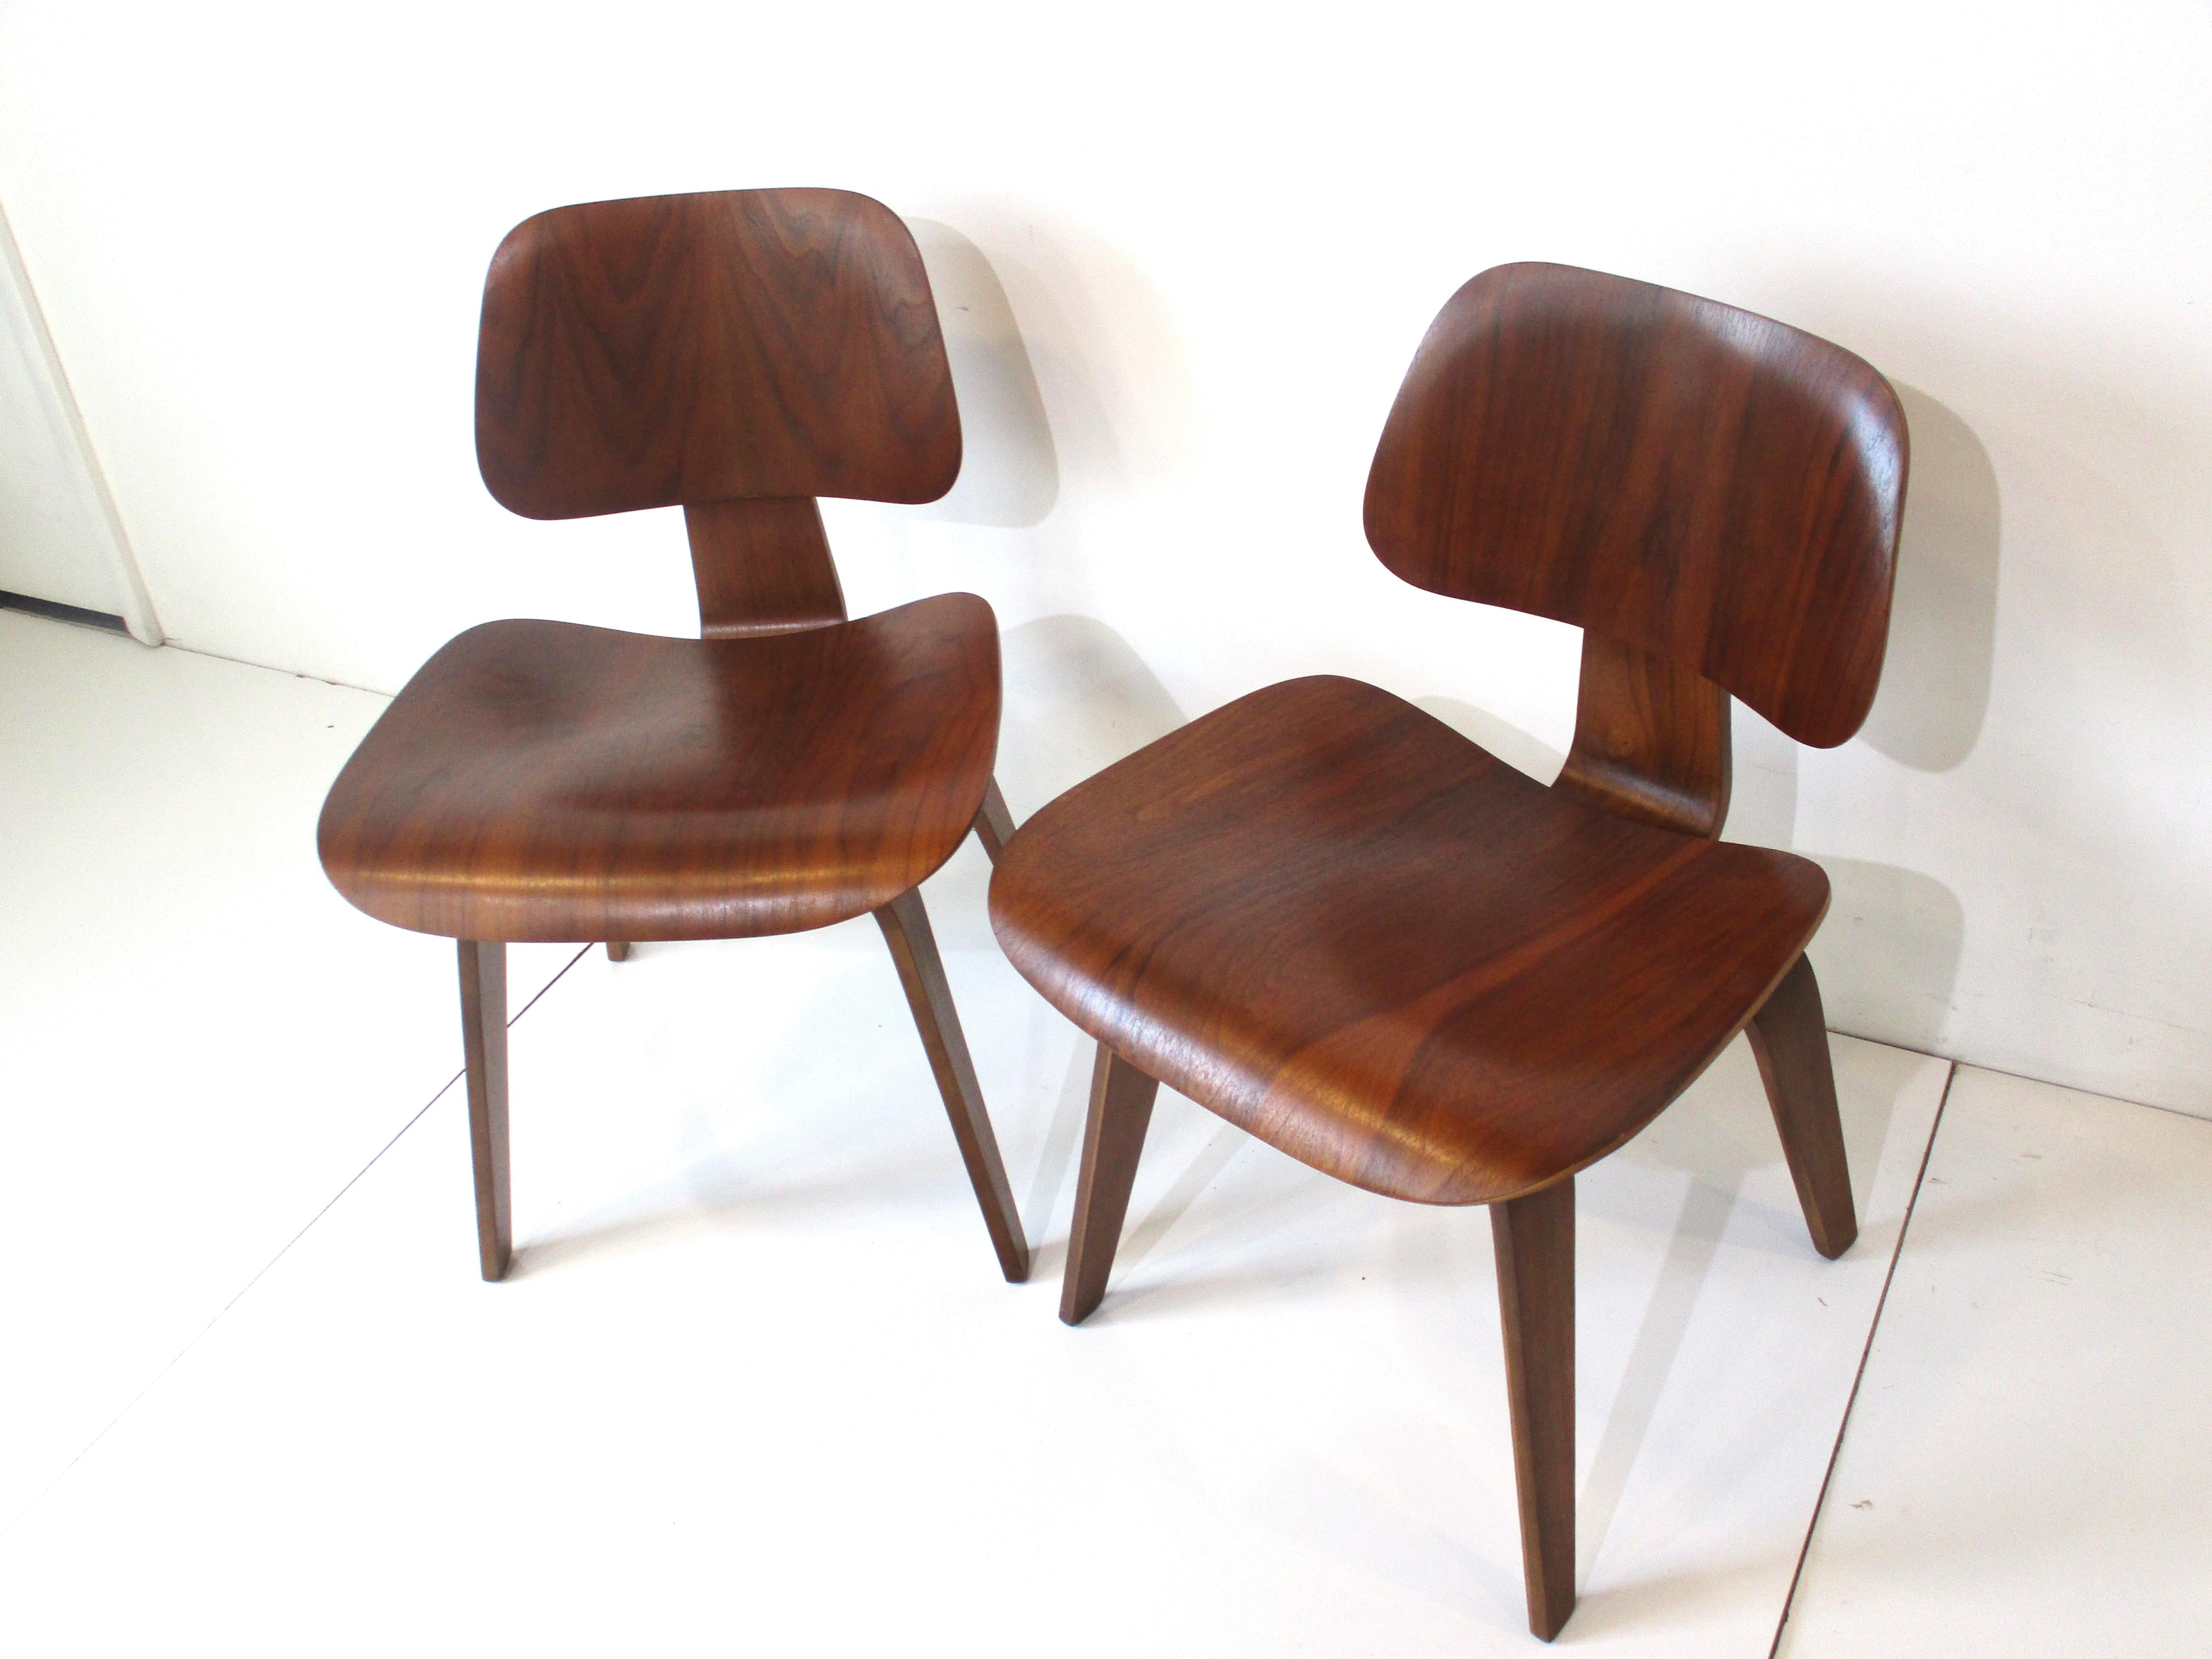 A pair of very well grained early bent walnut plywood side chairs designed by the iconic team of Ray and Charles Eames . These sculptural chairs are part of furniture history beginning after WW2 in which war production and peace time designs and